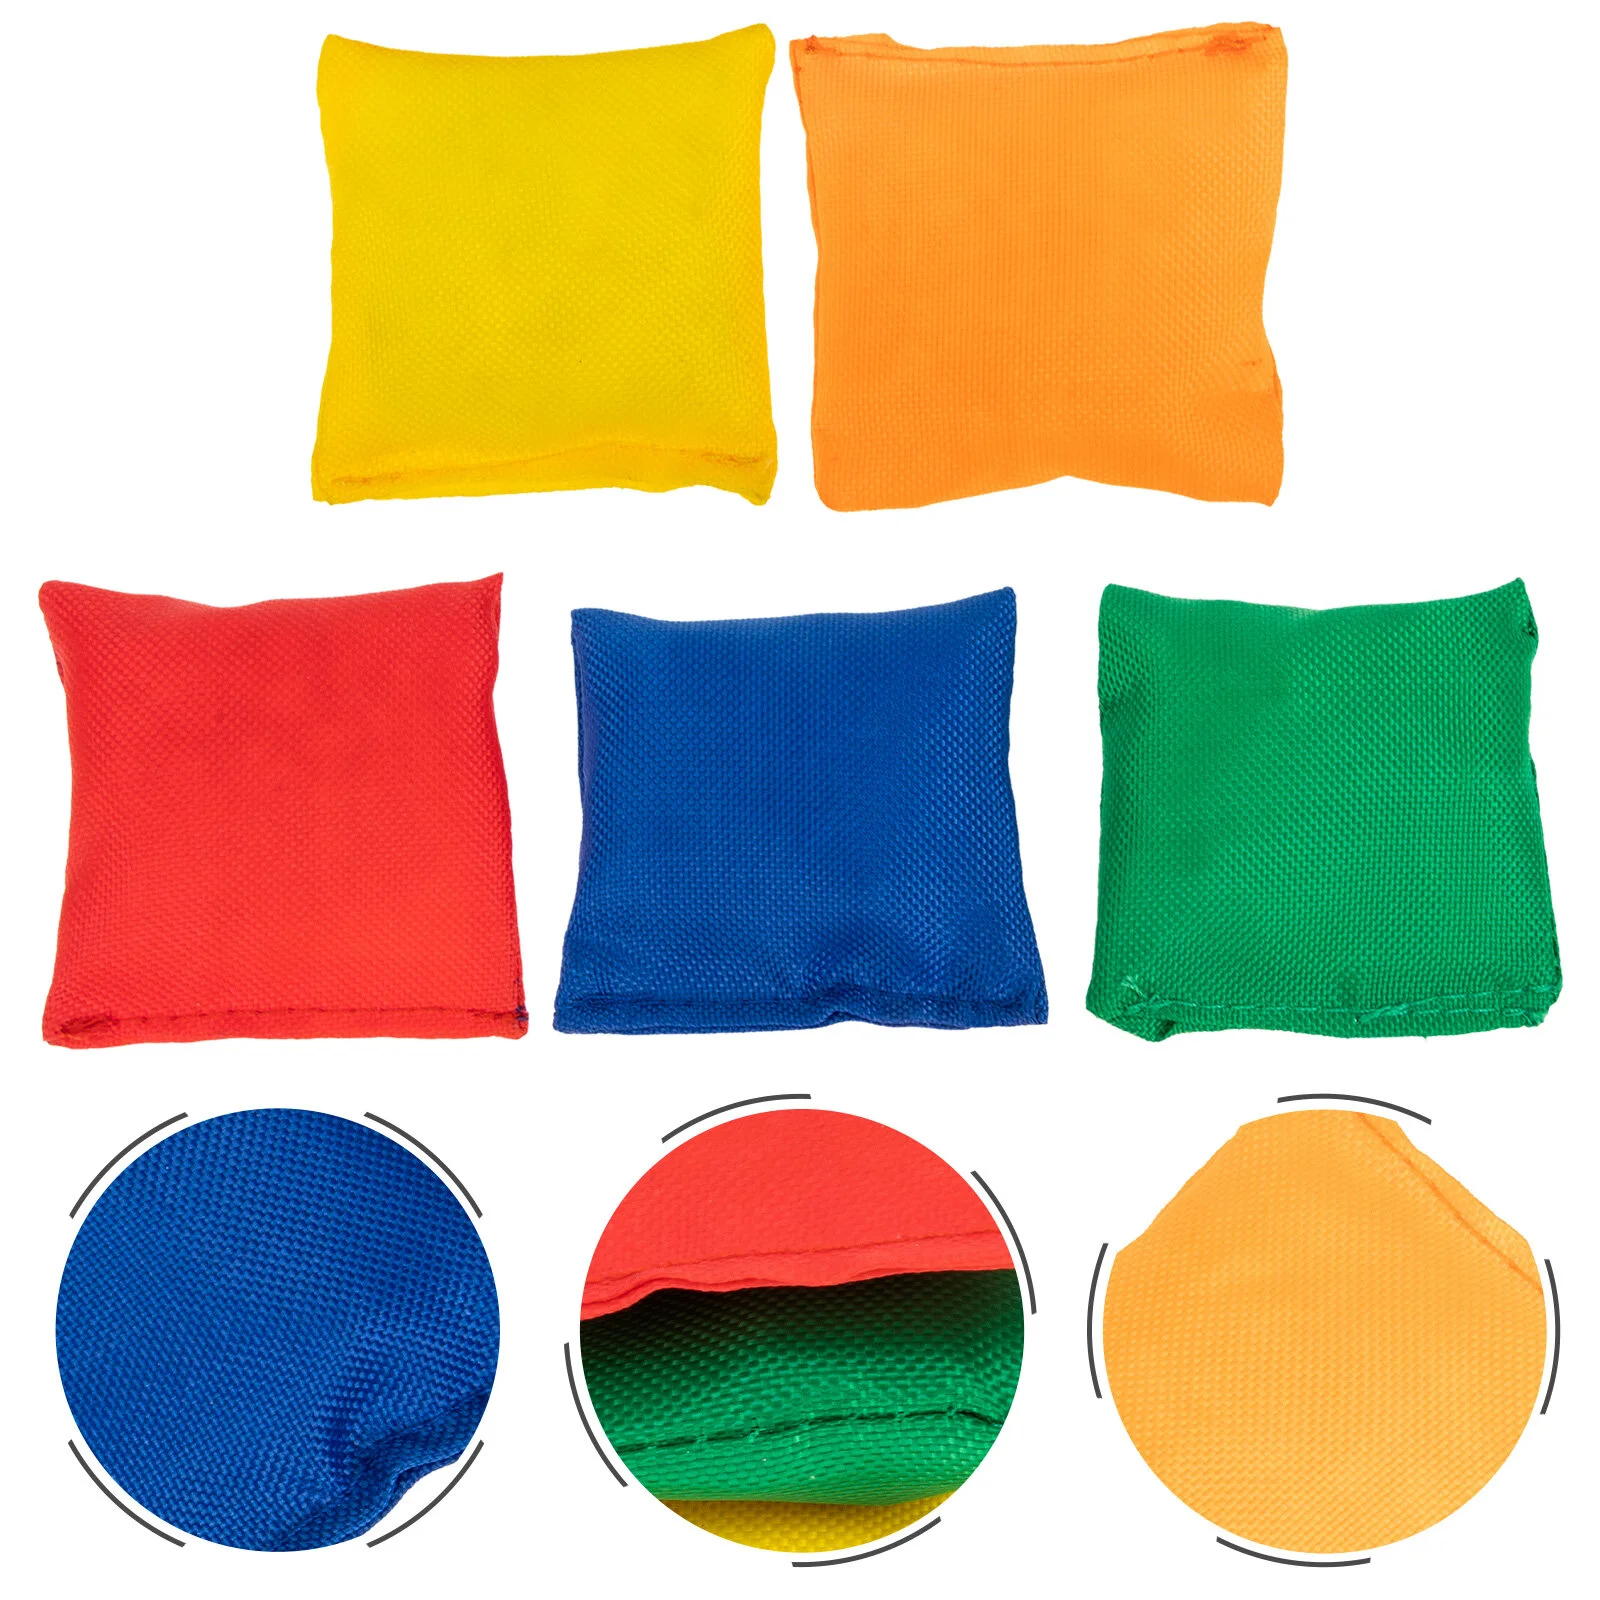 

10 Pcs Sand Throw Bean Bag Children Toys Playthings Kids Sandbags Supple Canvas Throwing Pupils Toss Game Carnival Supply